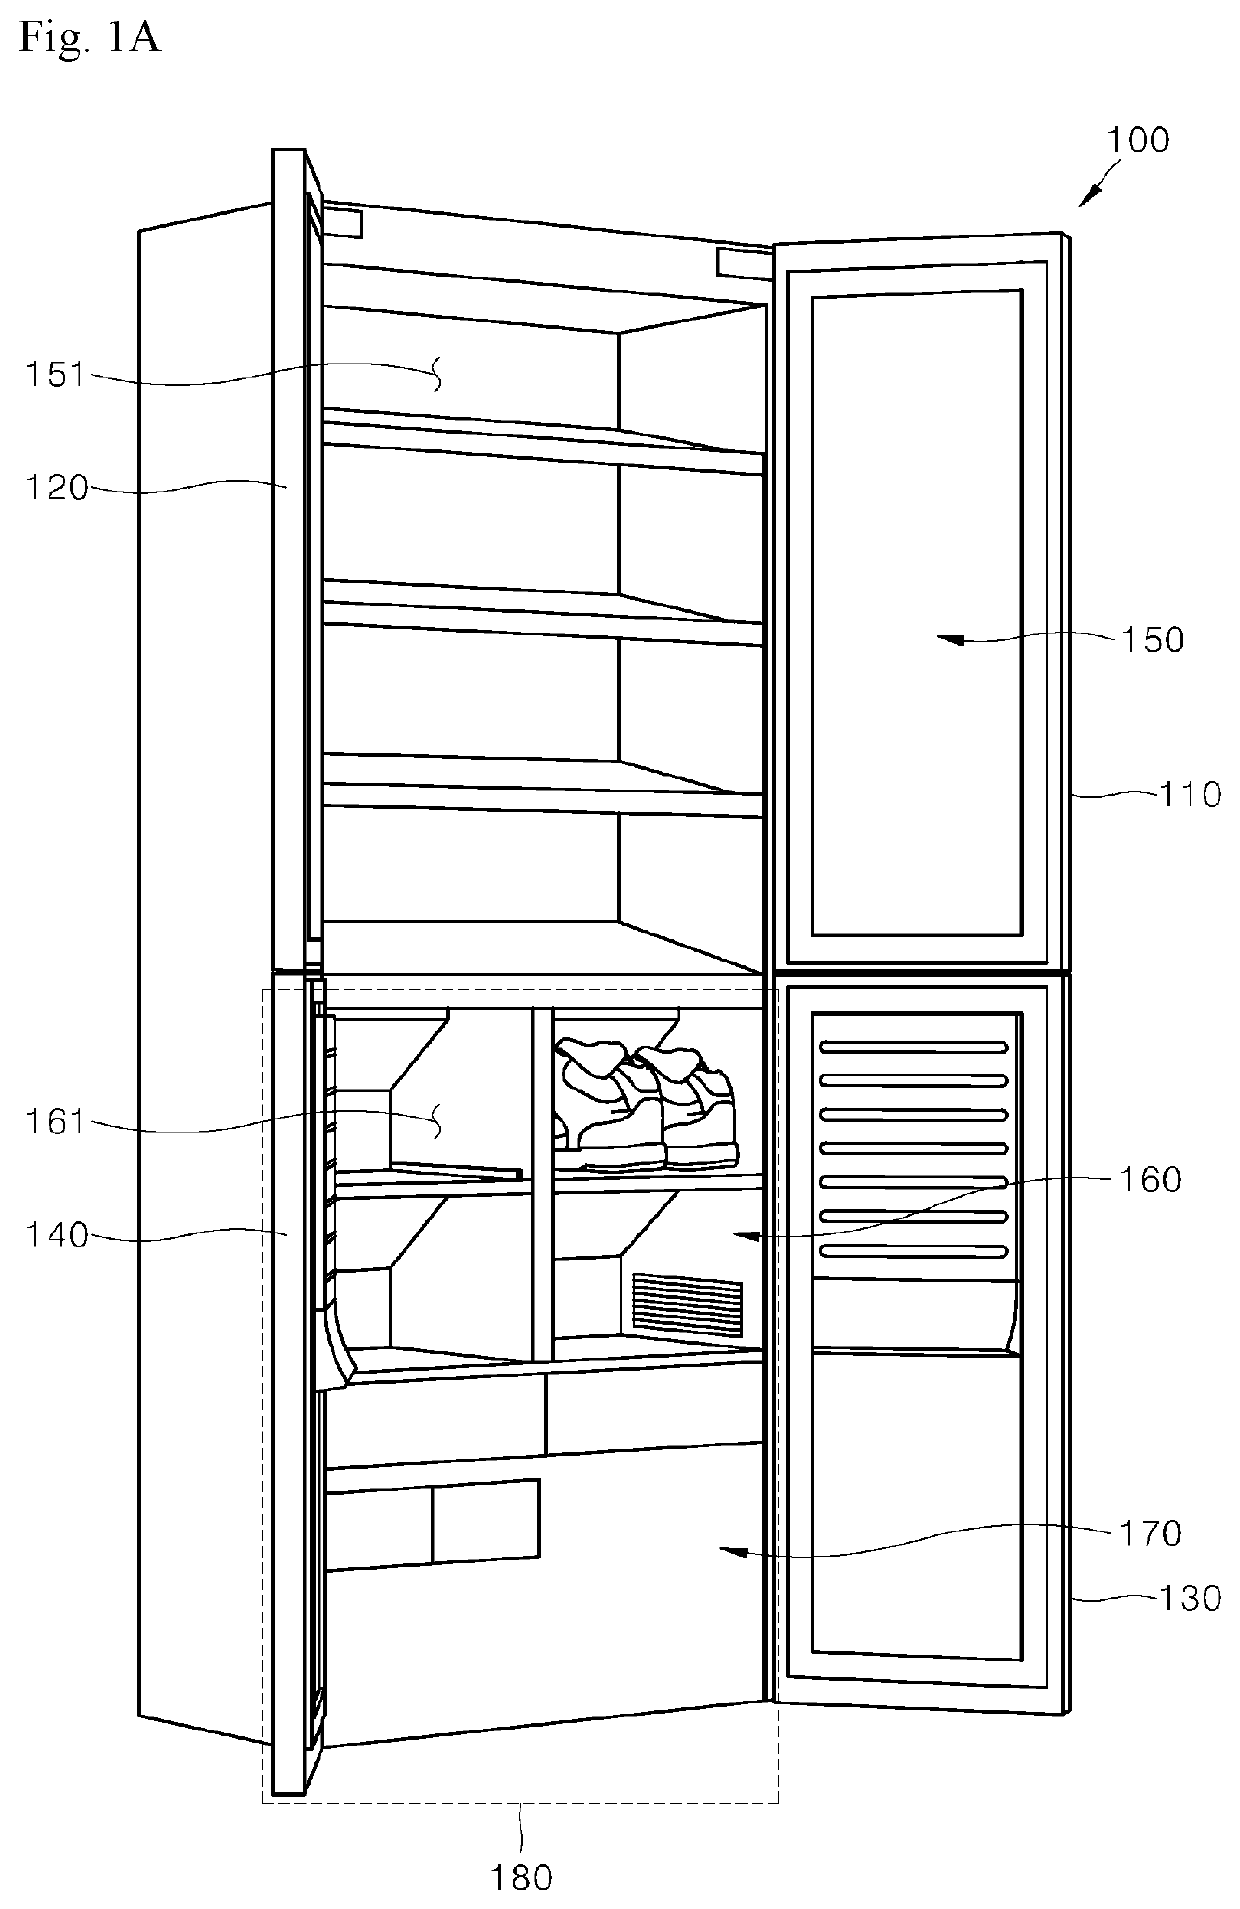 Apparatus and method for treating shoes